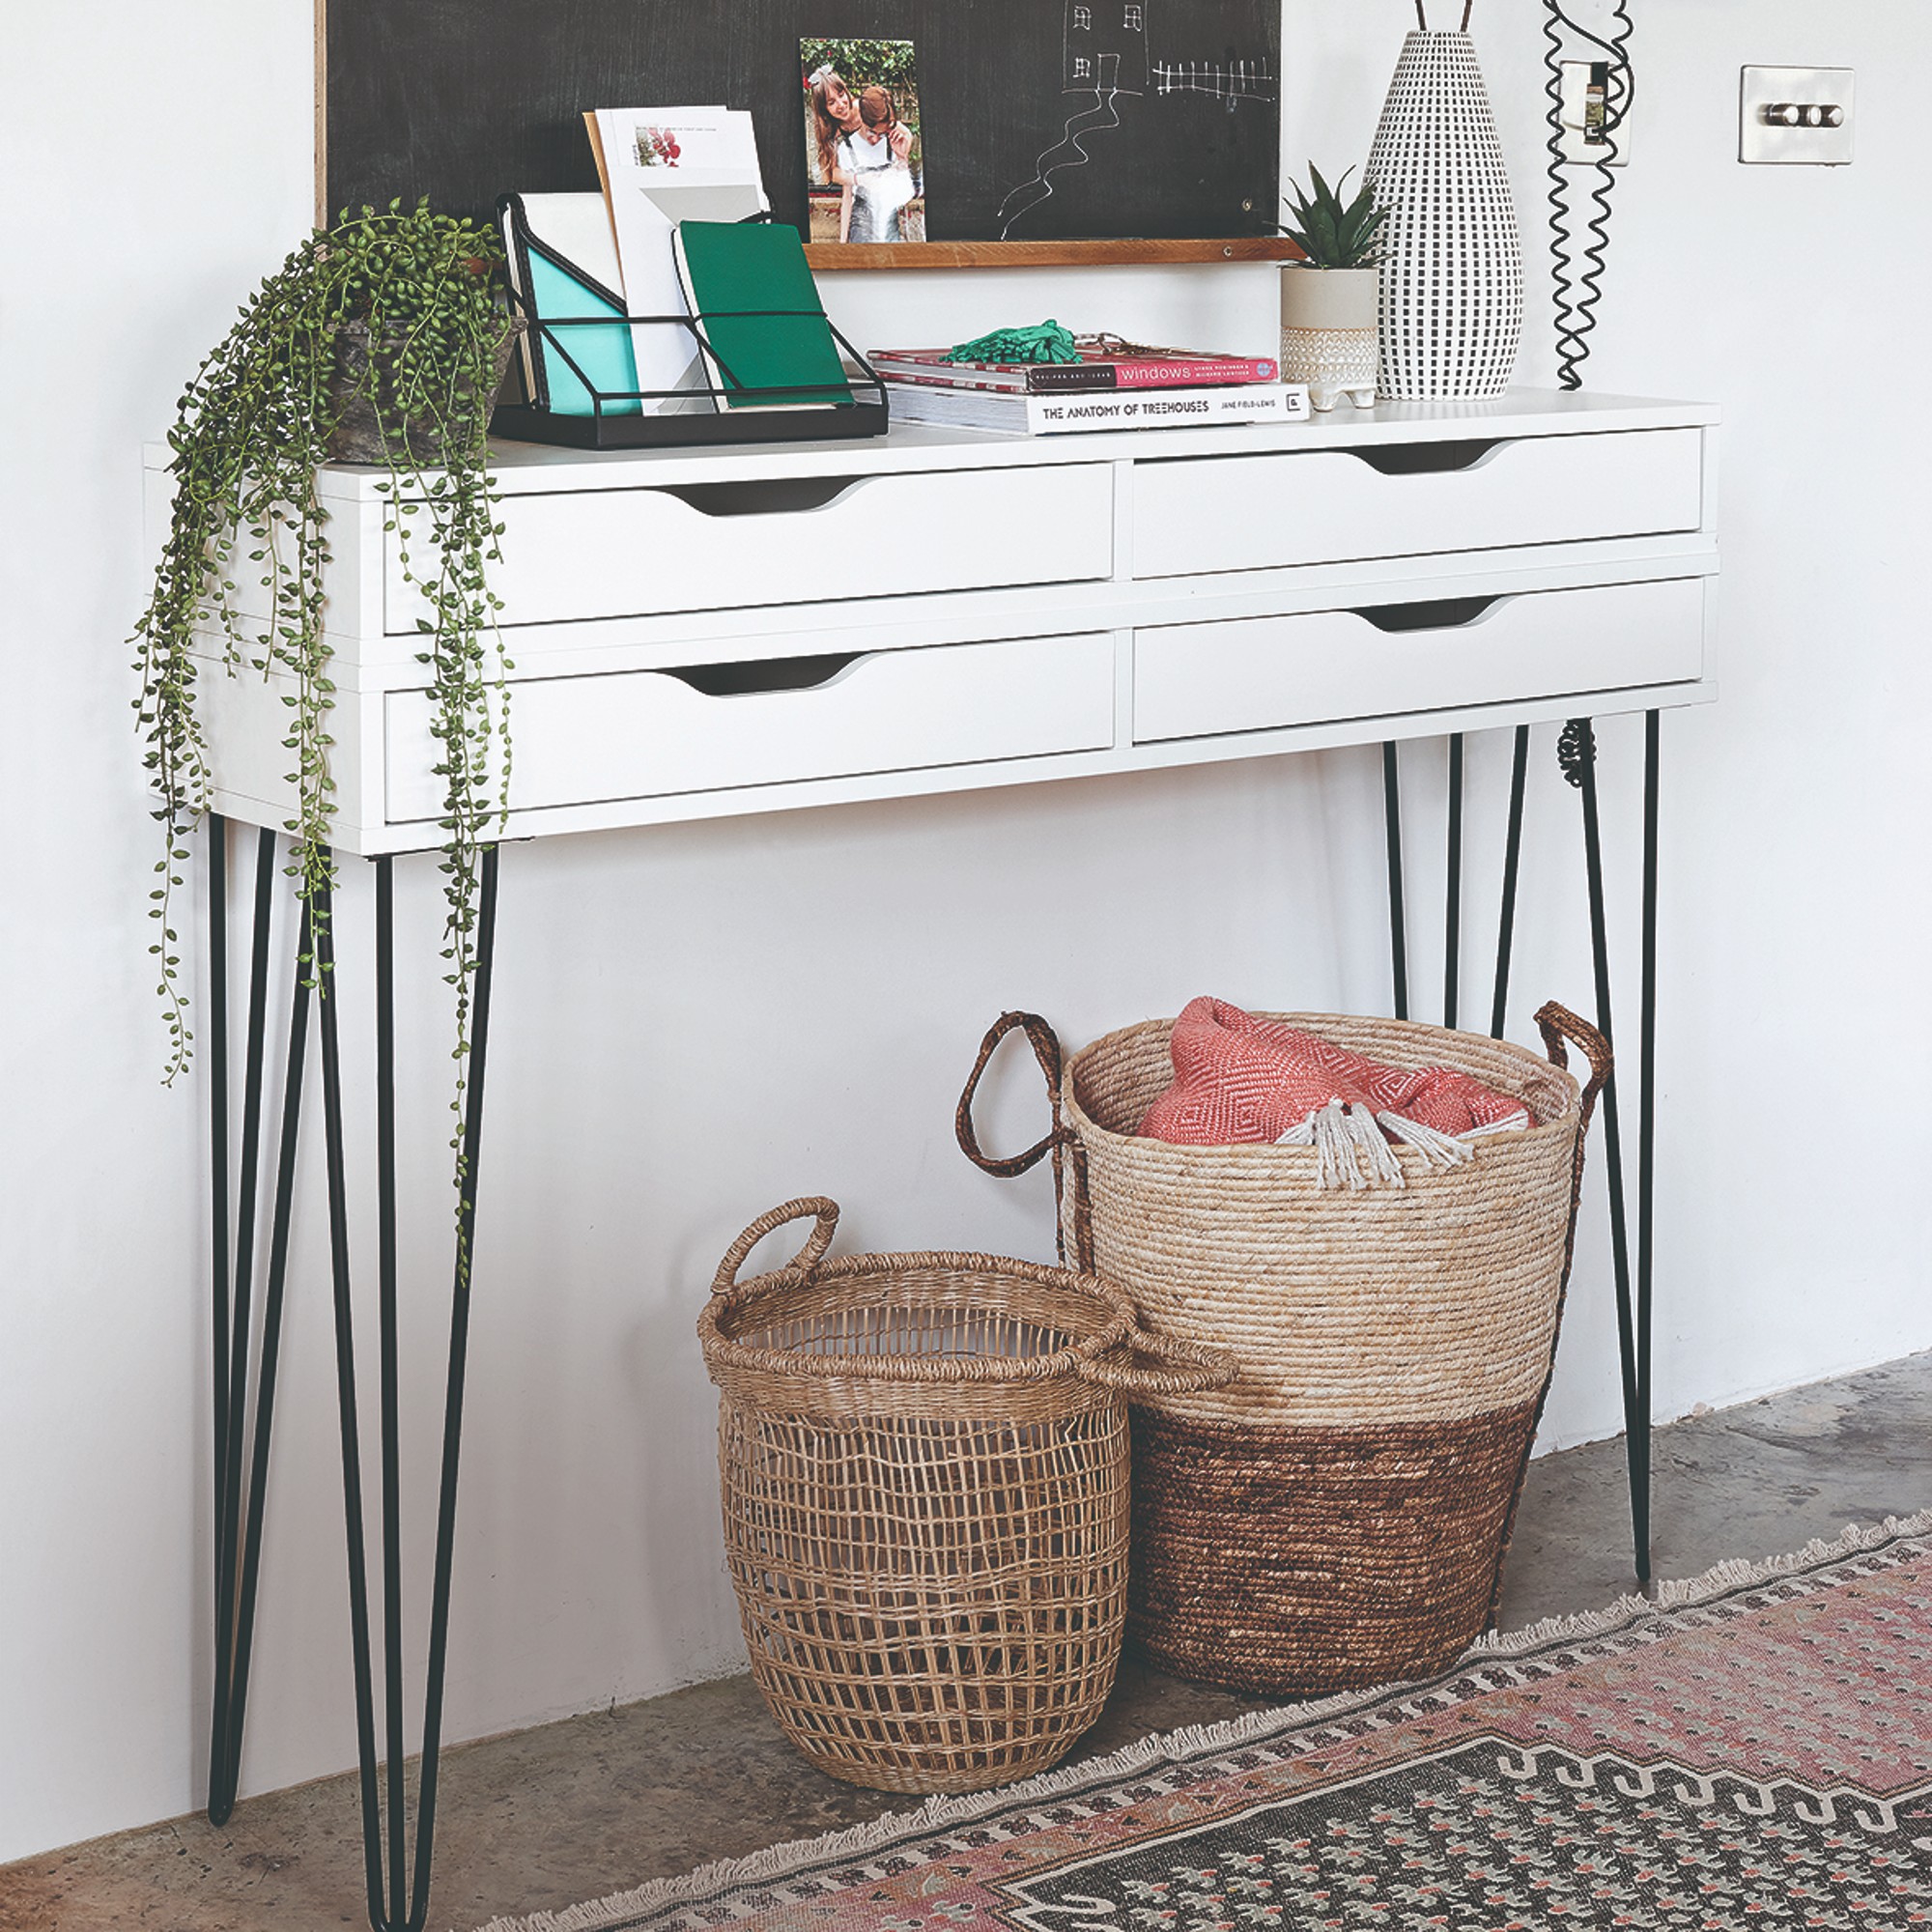 An IKEA console table with hairpin legs